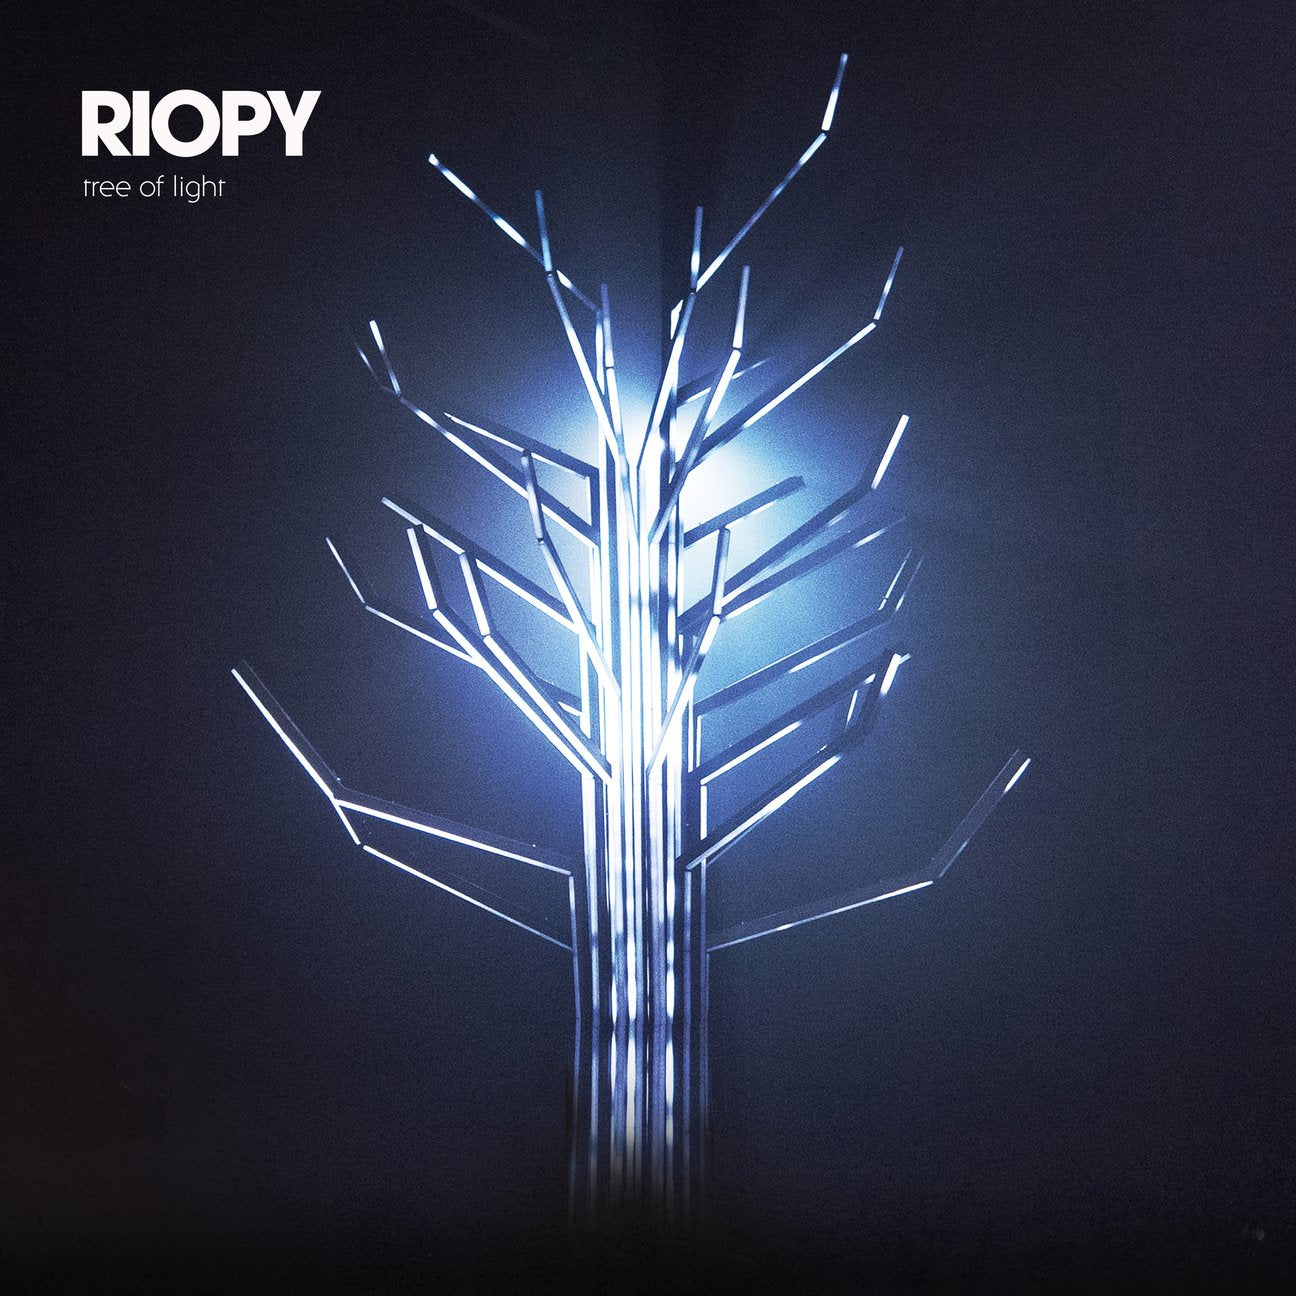 Youami sheet music from RIOPY's Tree of Light album